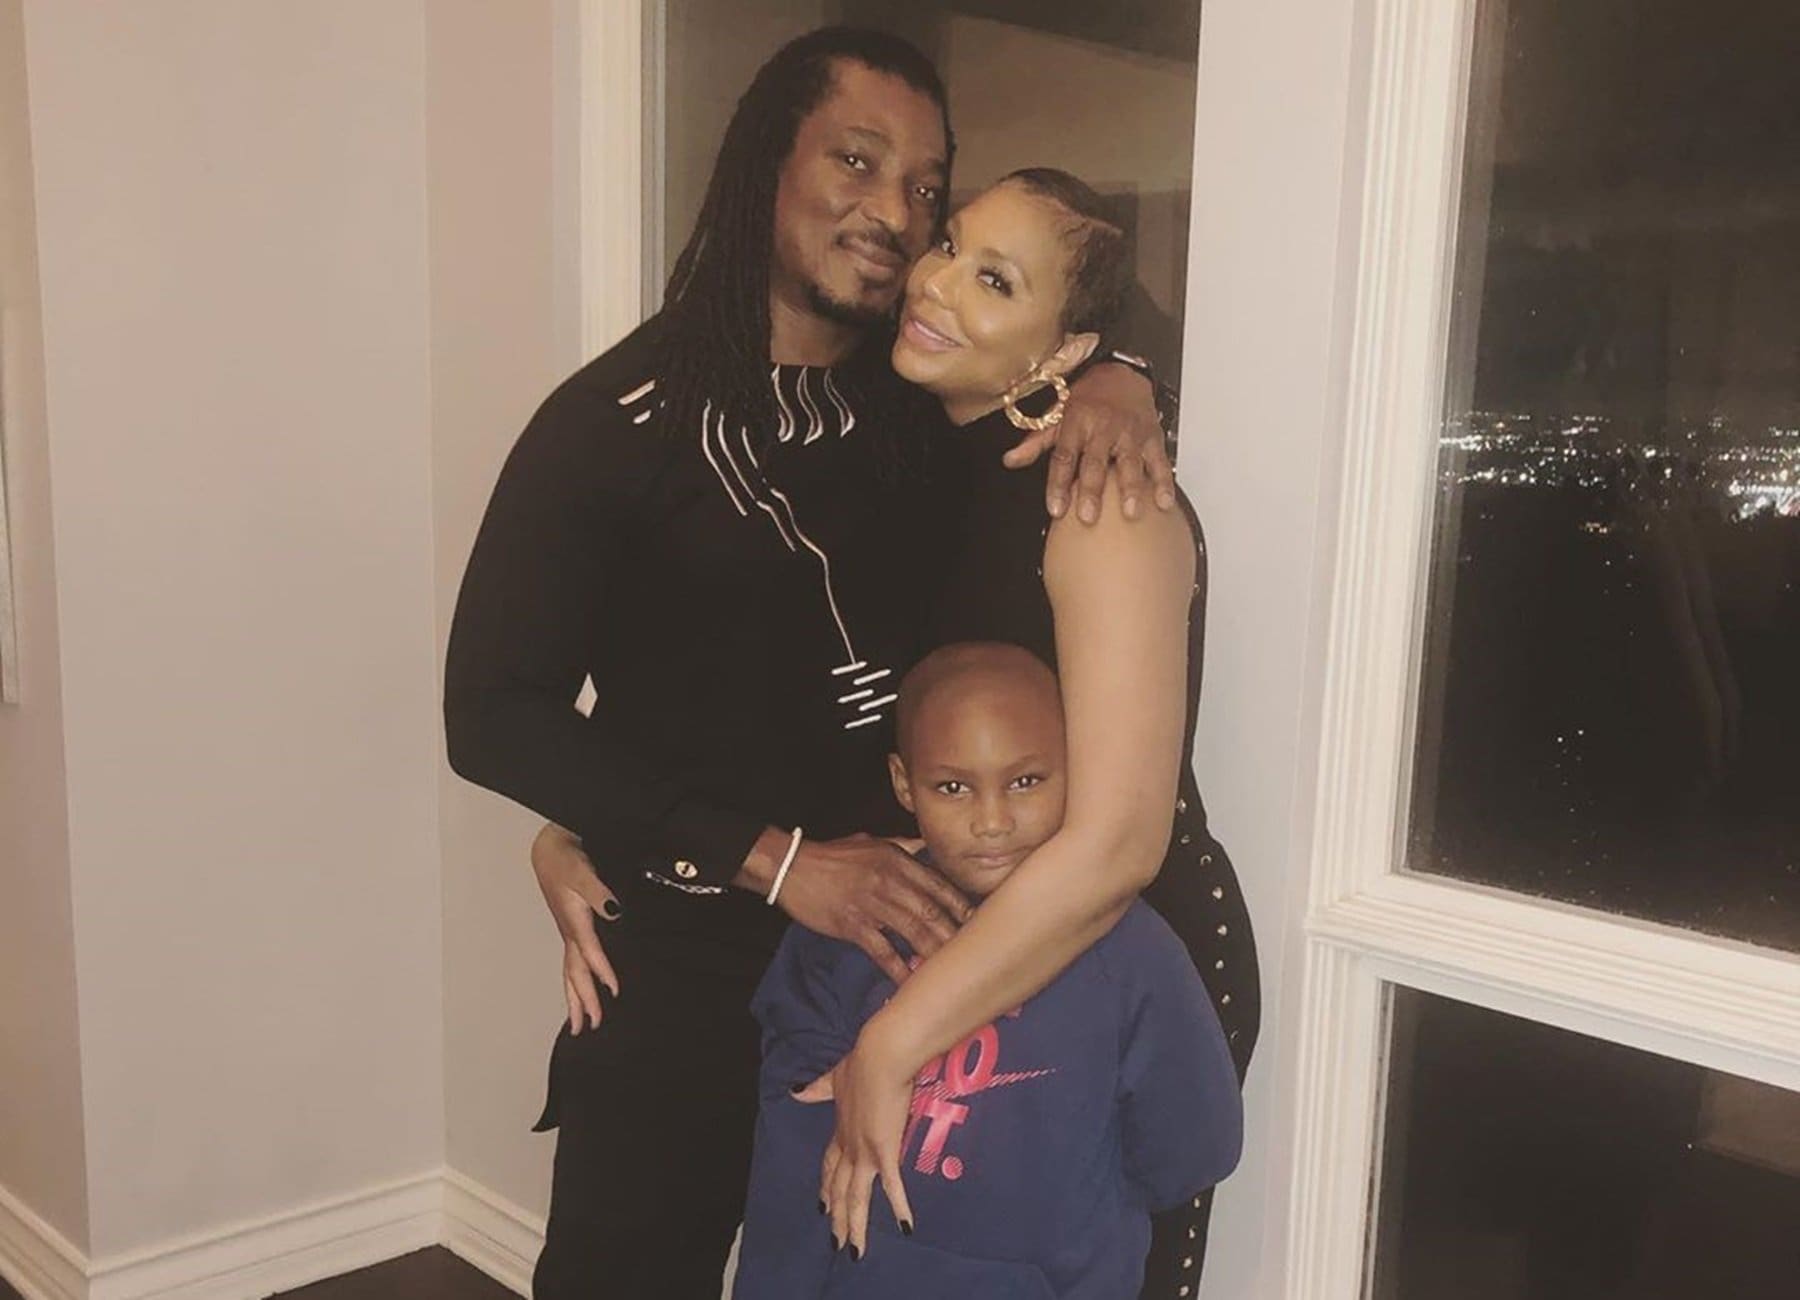 Tamar Braxton's BF, David Adefeso, Continues His Plan To Support Kids And Students - Here Are The Subjects He'd Like To See Taught In Schools